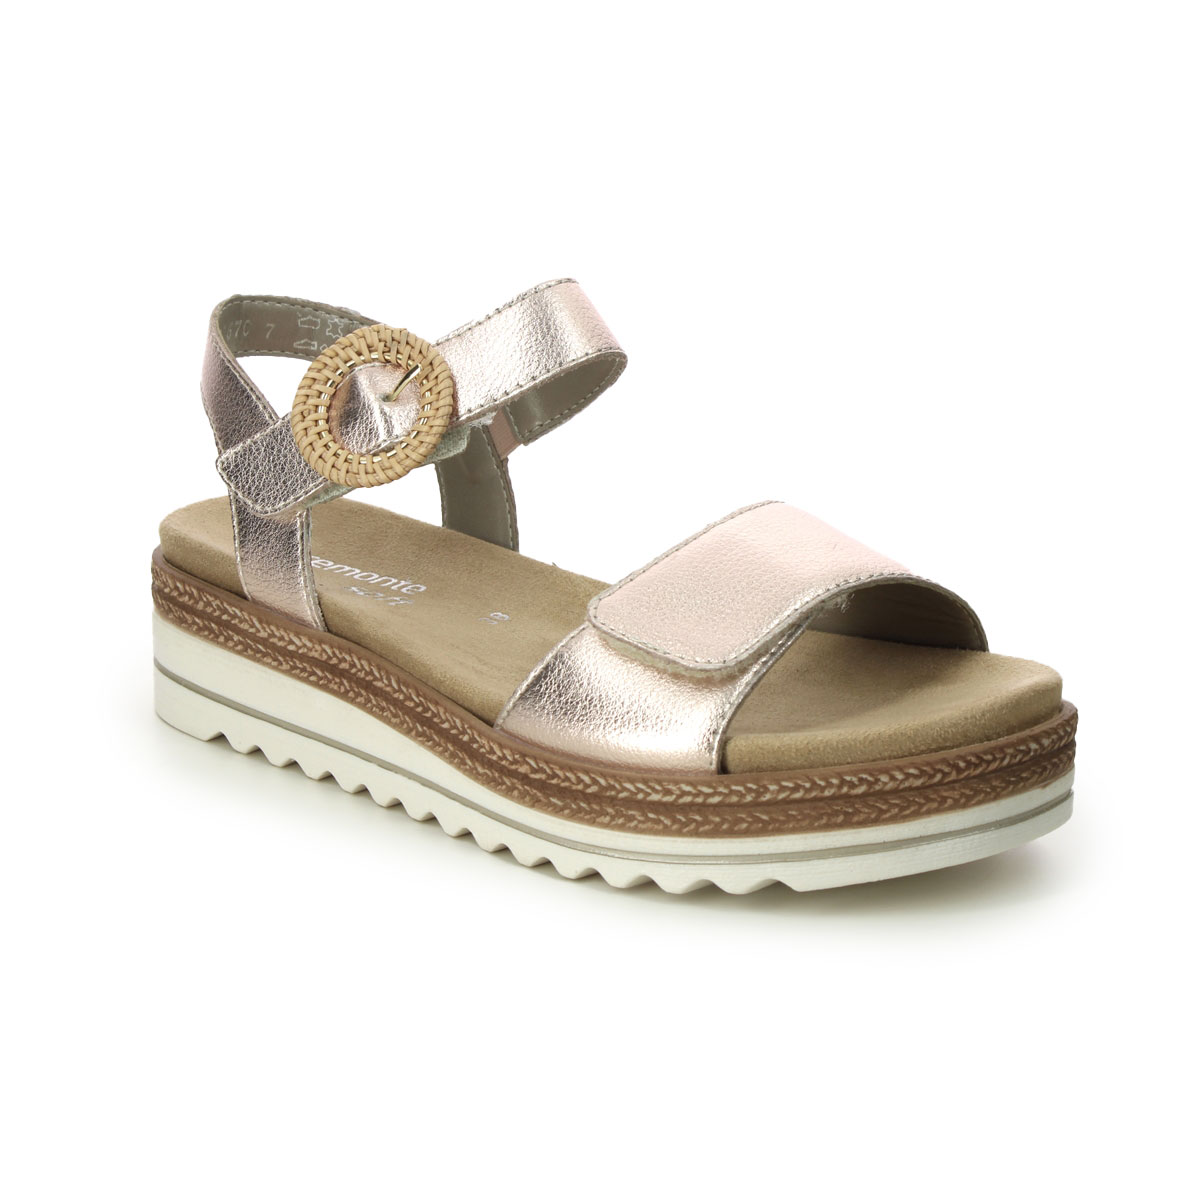 Remonte D0Q52-31 Bily  Flatform Platinum Womens Wedge Sandals in a Plain Leather in Size 36